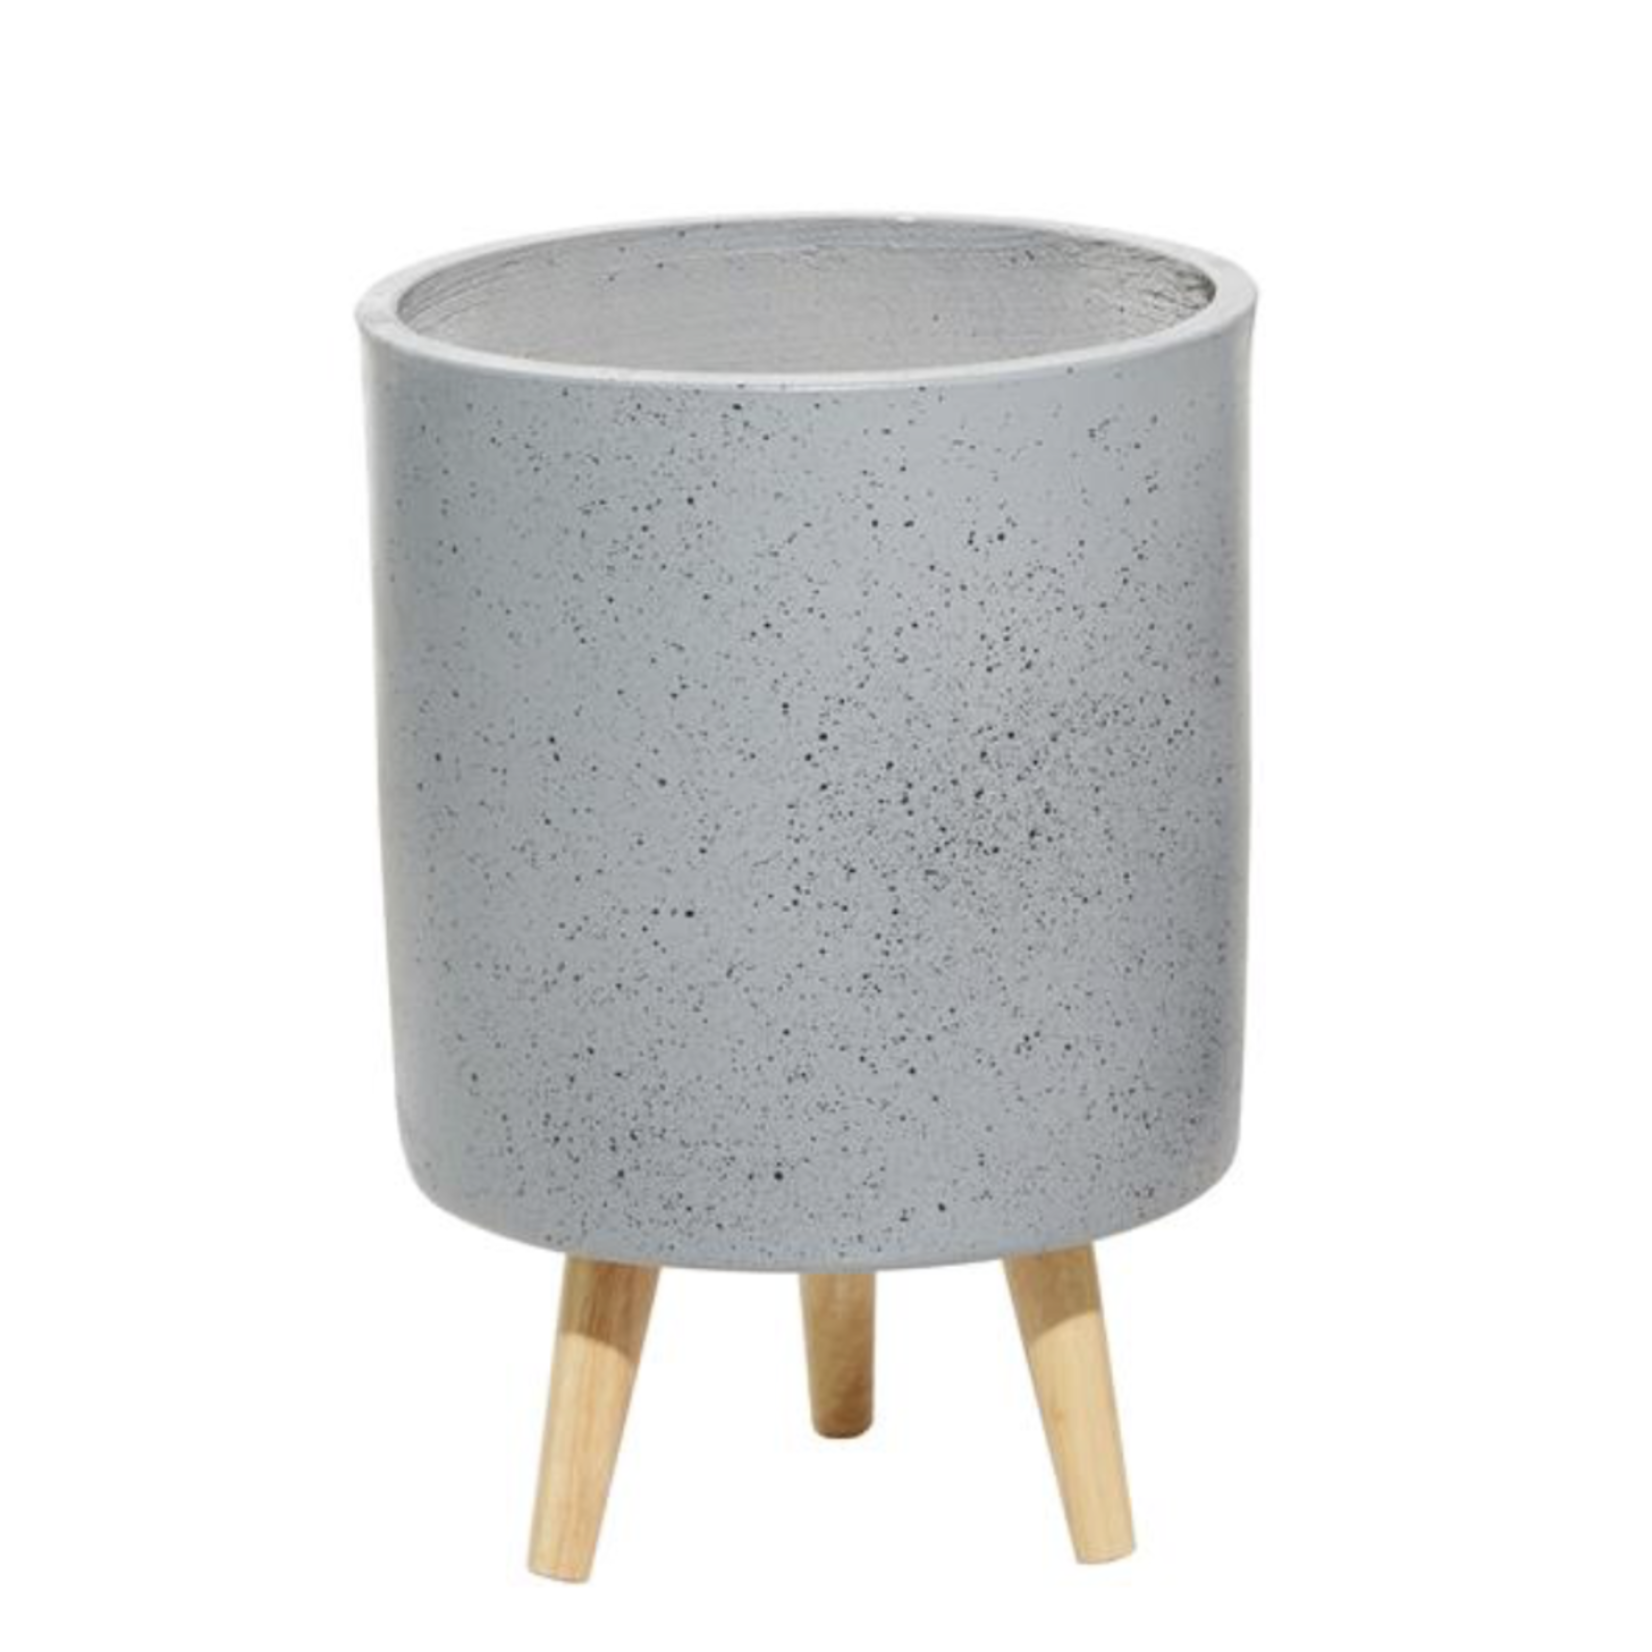 17.25”H X 12” LARGE LIGHT GREY HEXAGON MAGNESIUM OXIDE CONTEMPORARY PLANTER(NOT WATER TIGHT)